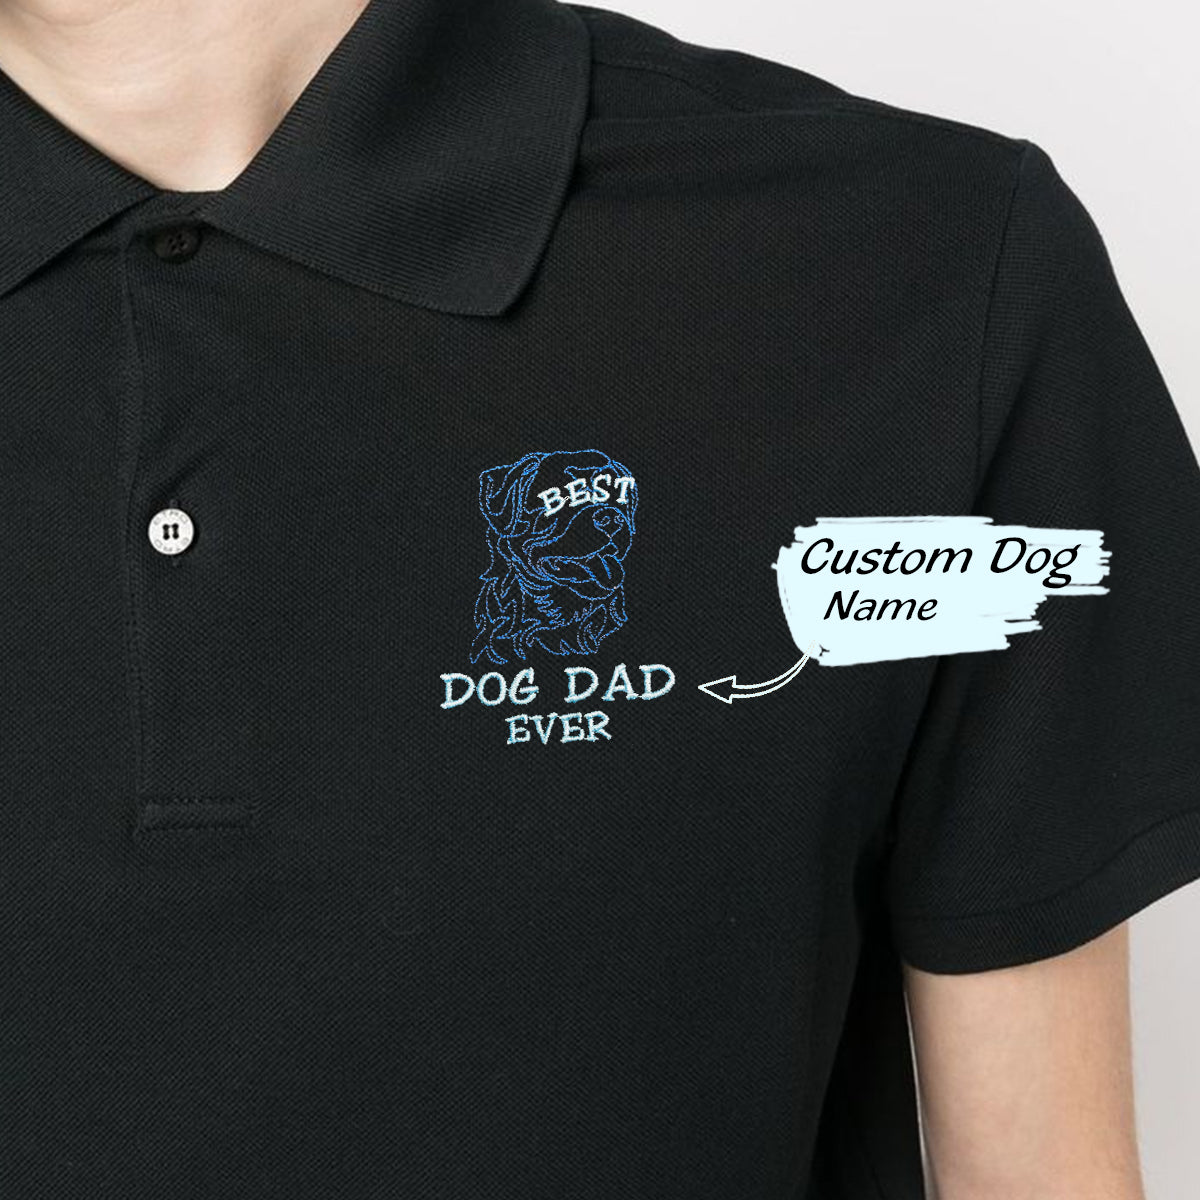 Personalized Best Dog Dad Ever Polo Shirt with Dog Name Embroidered, Gift Idea for Dog Dad